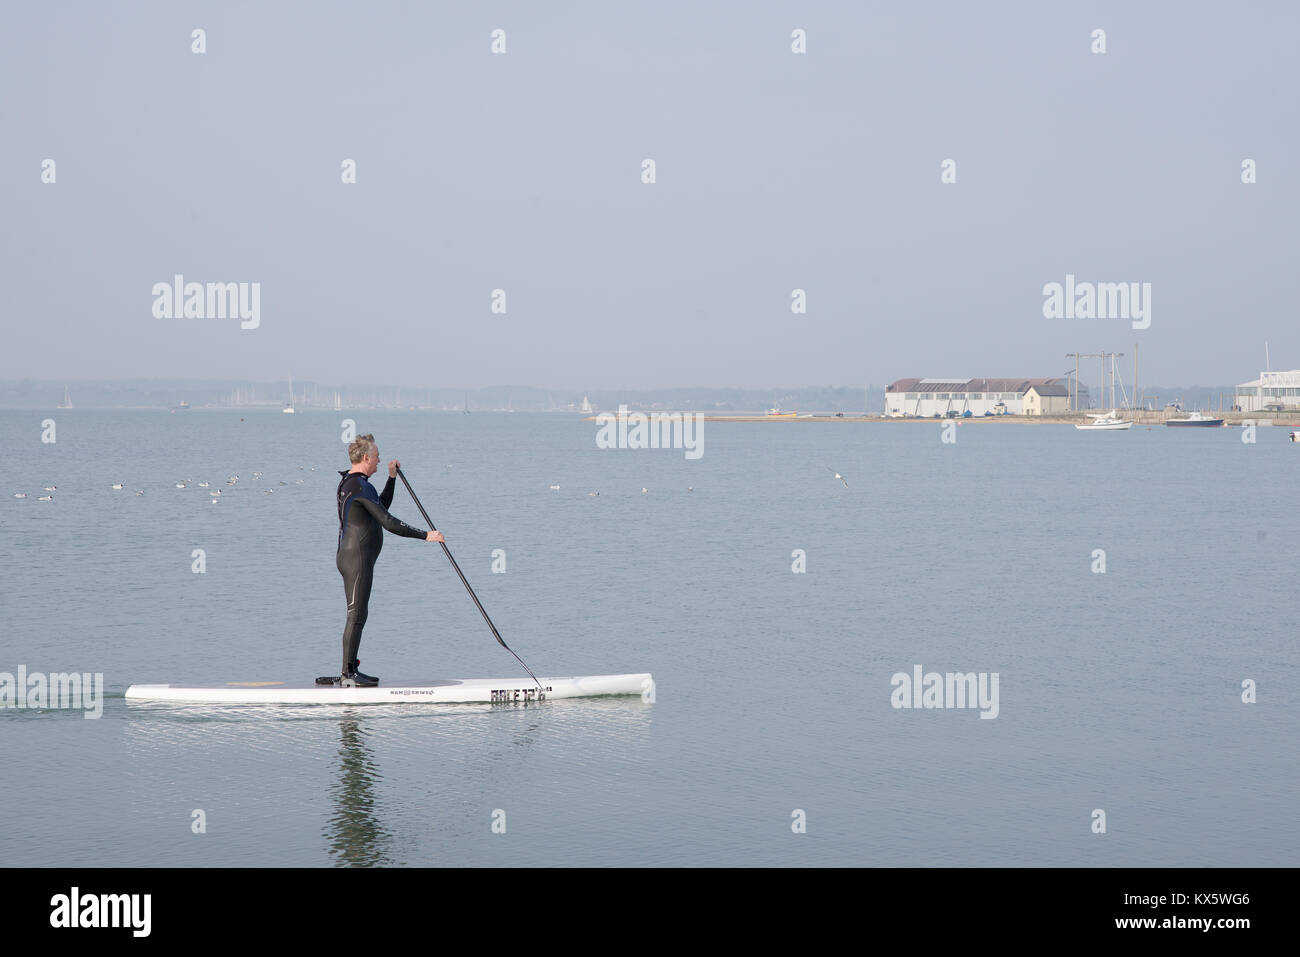 Man in a wet suit on a surf board in the sea Stock Photo